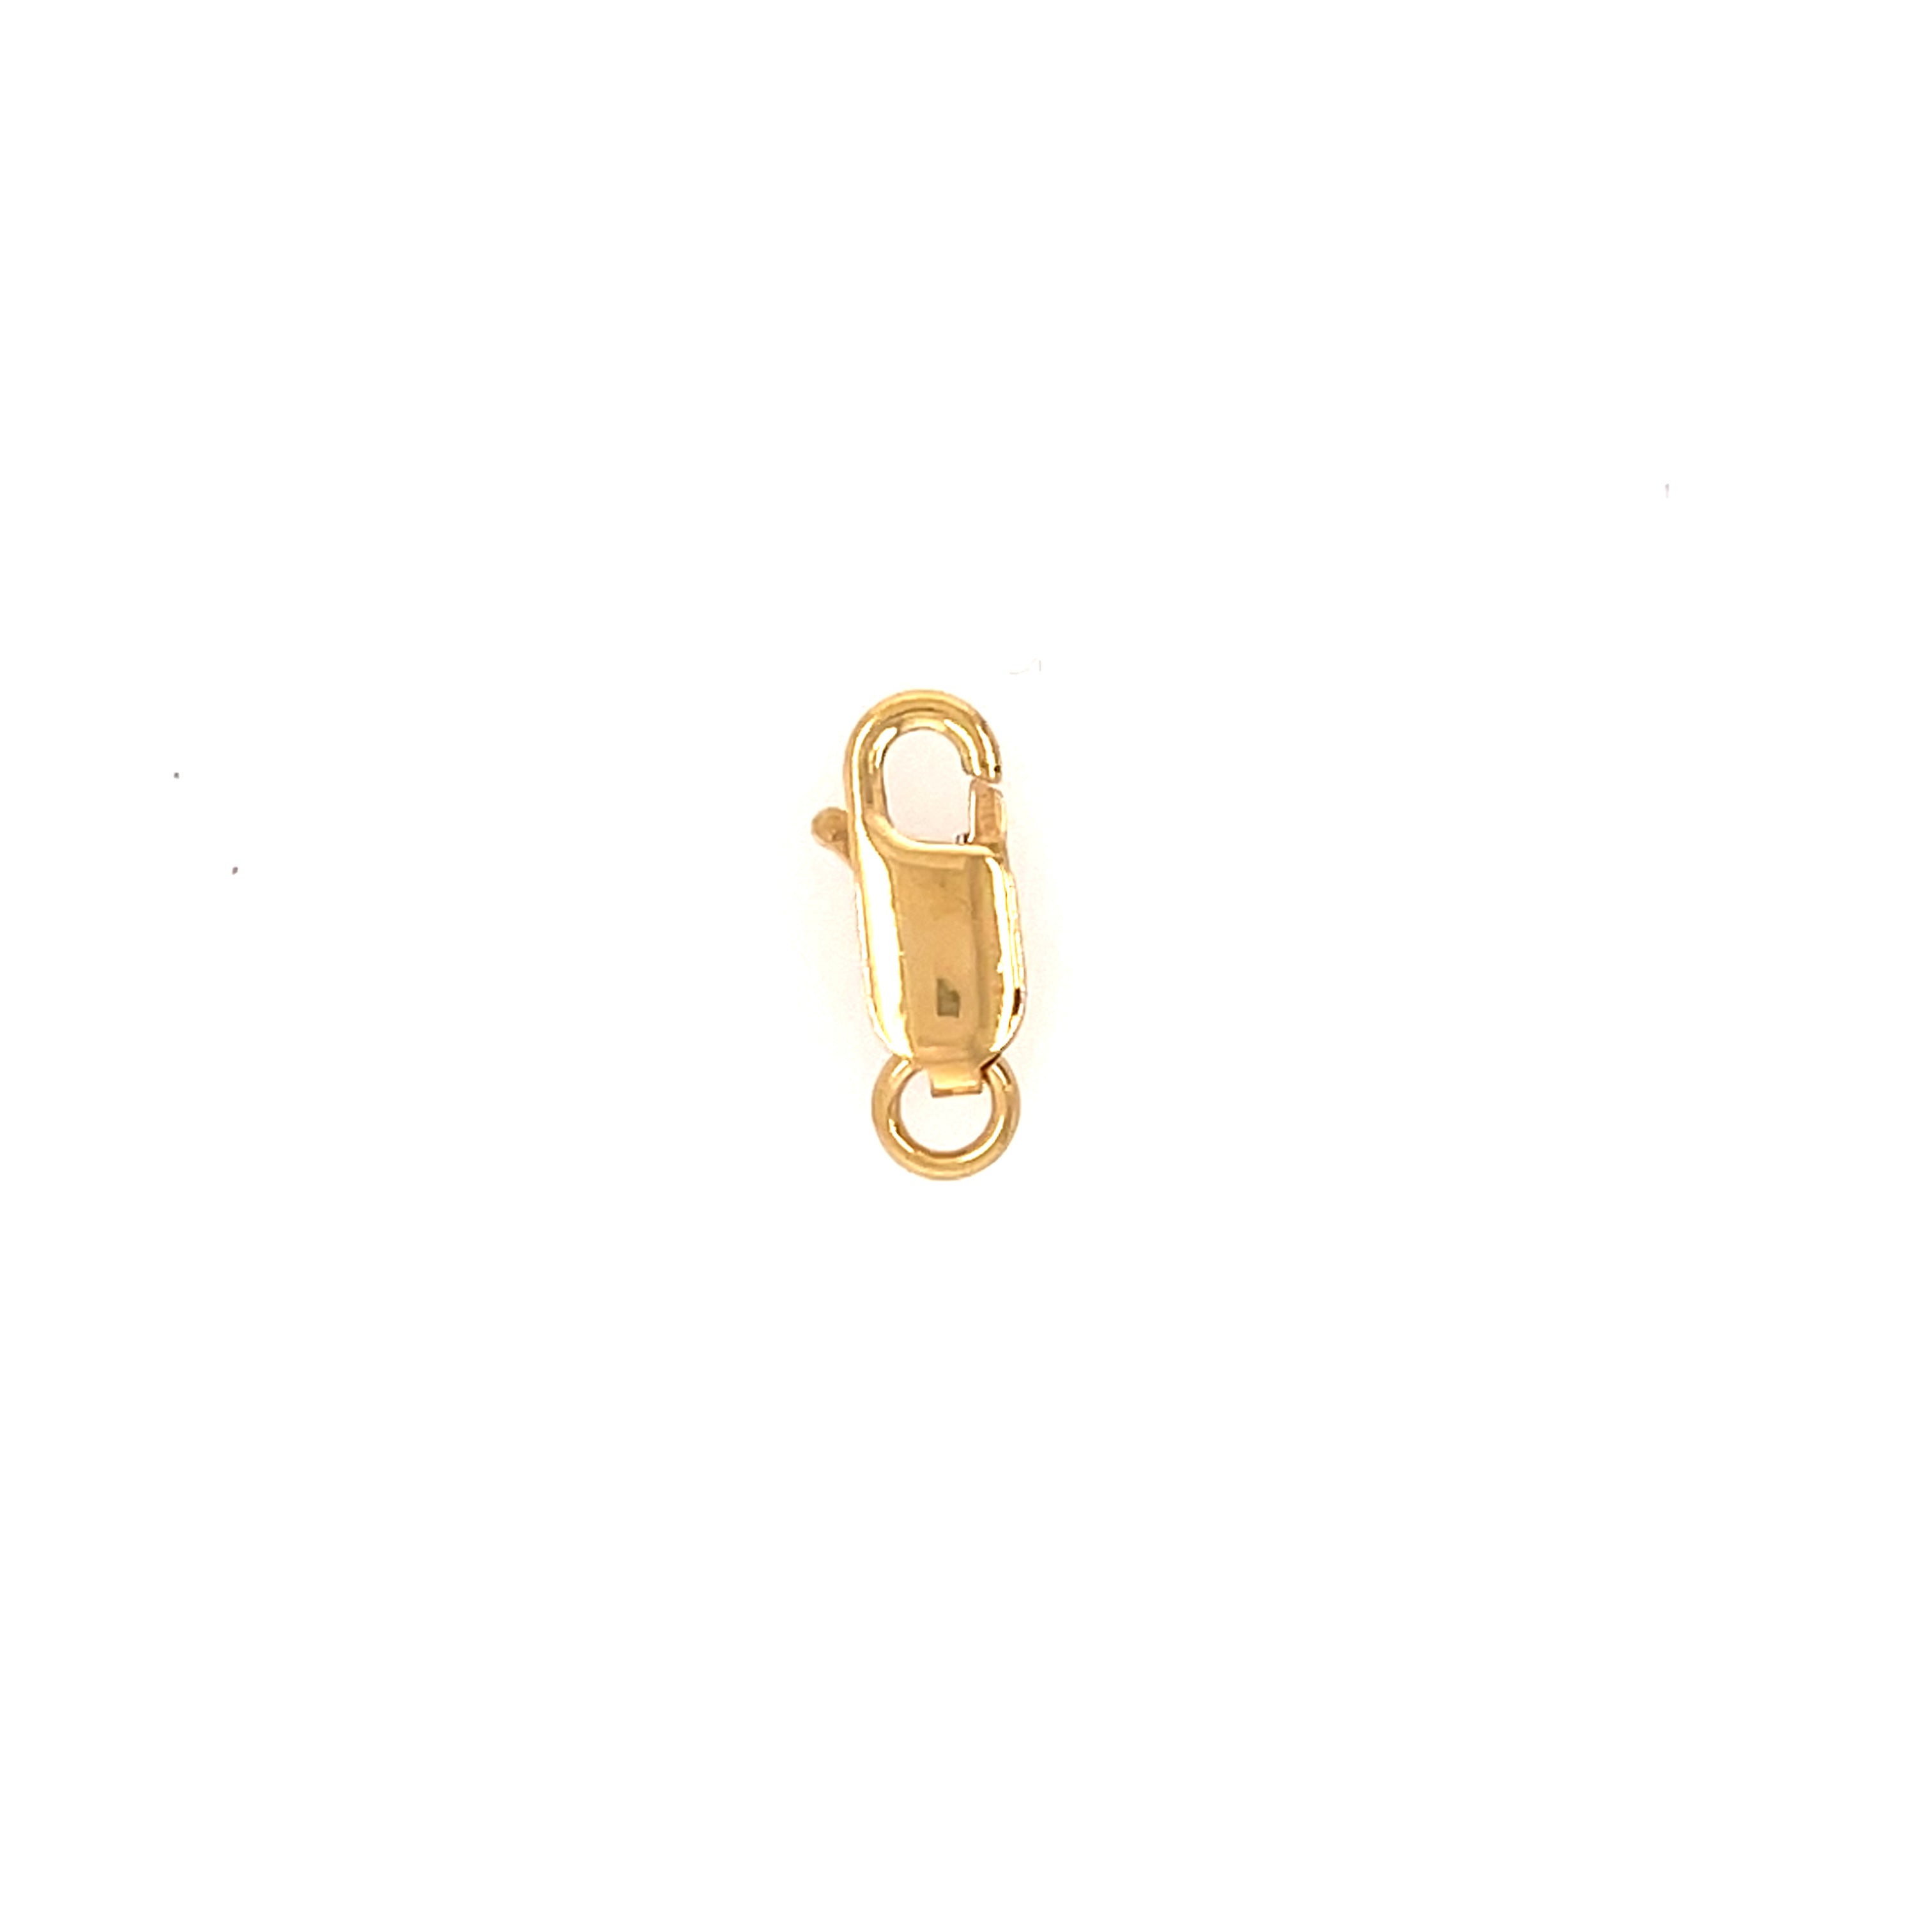 Real 22k 916 solid gold lobster lock clasp 3 size: Large Medium Small (hm  E-2 )